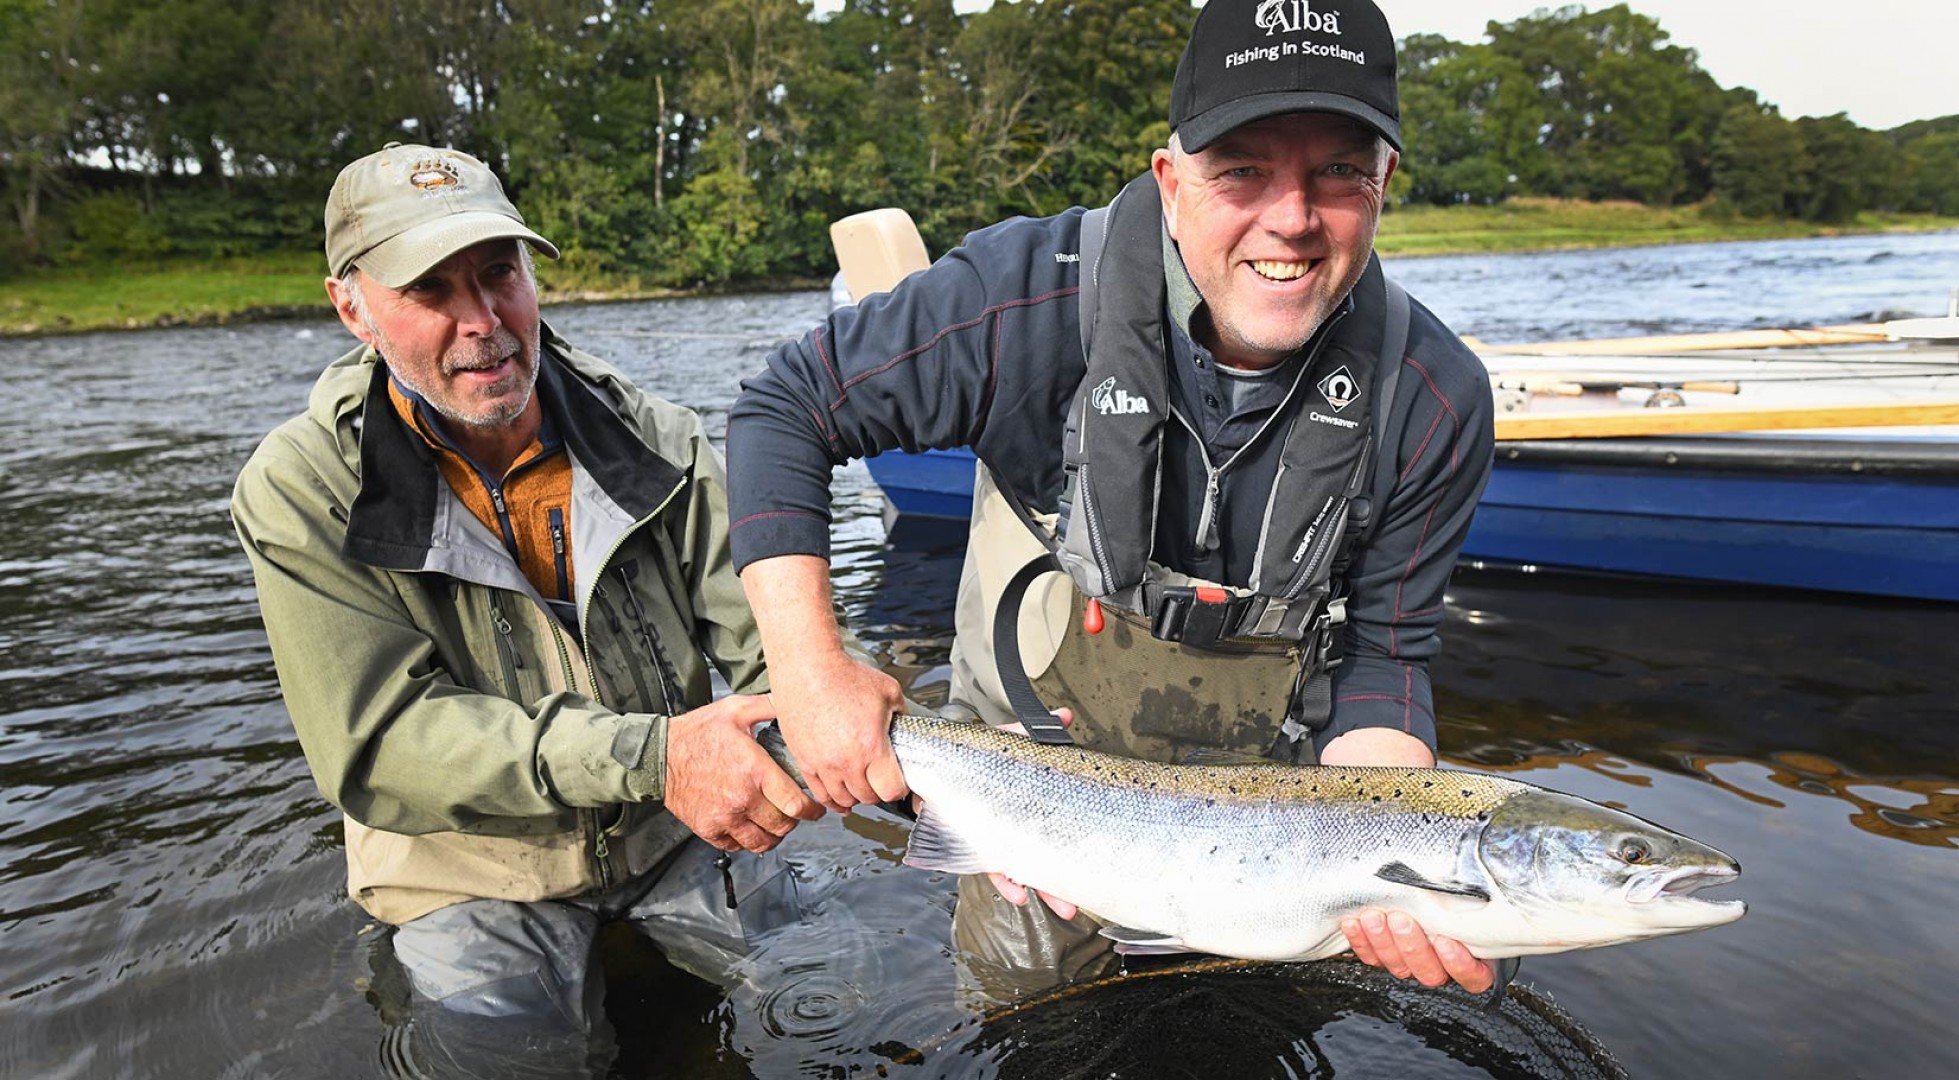 Salmon Fishing on the River Ness. Premium tackle, pro guide